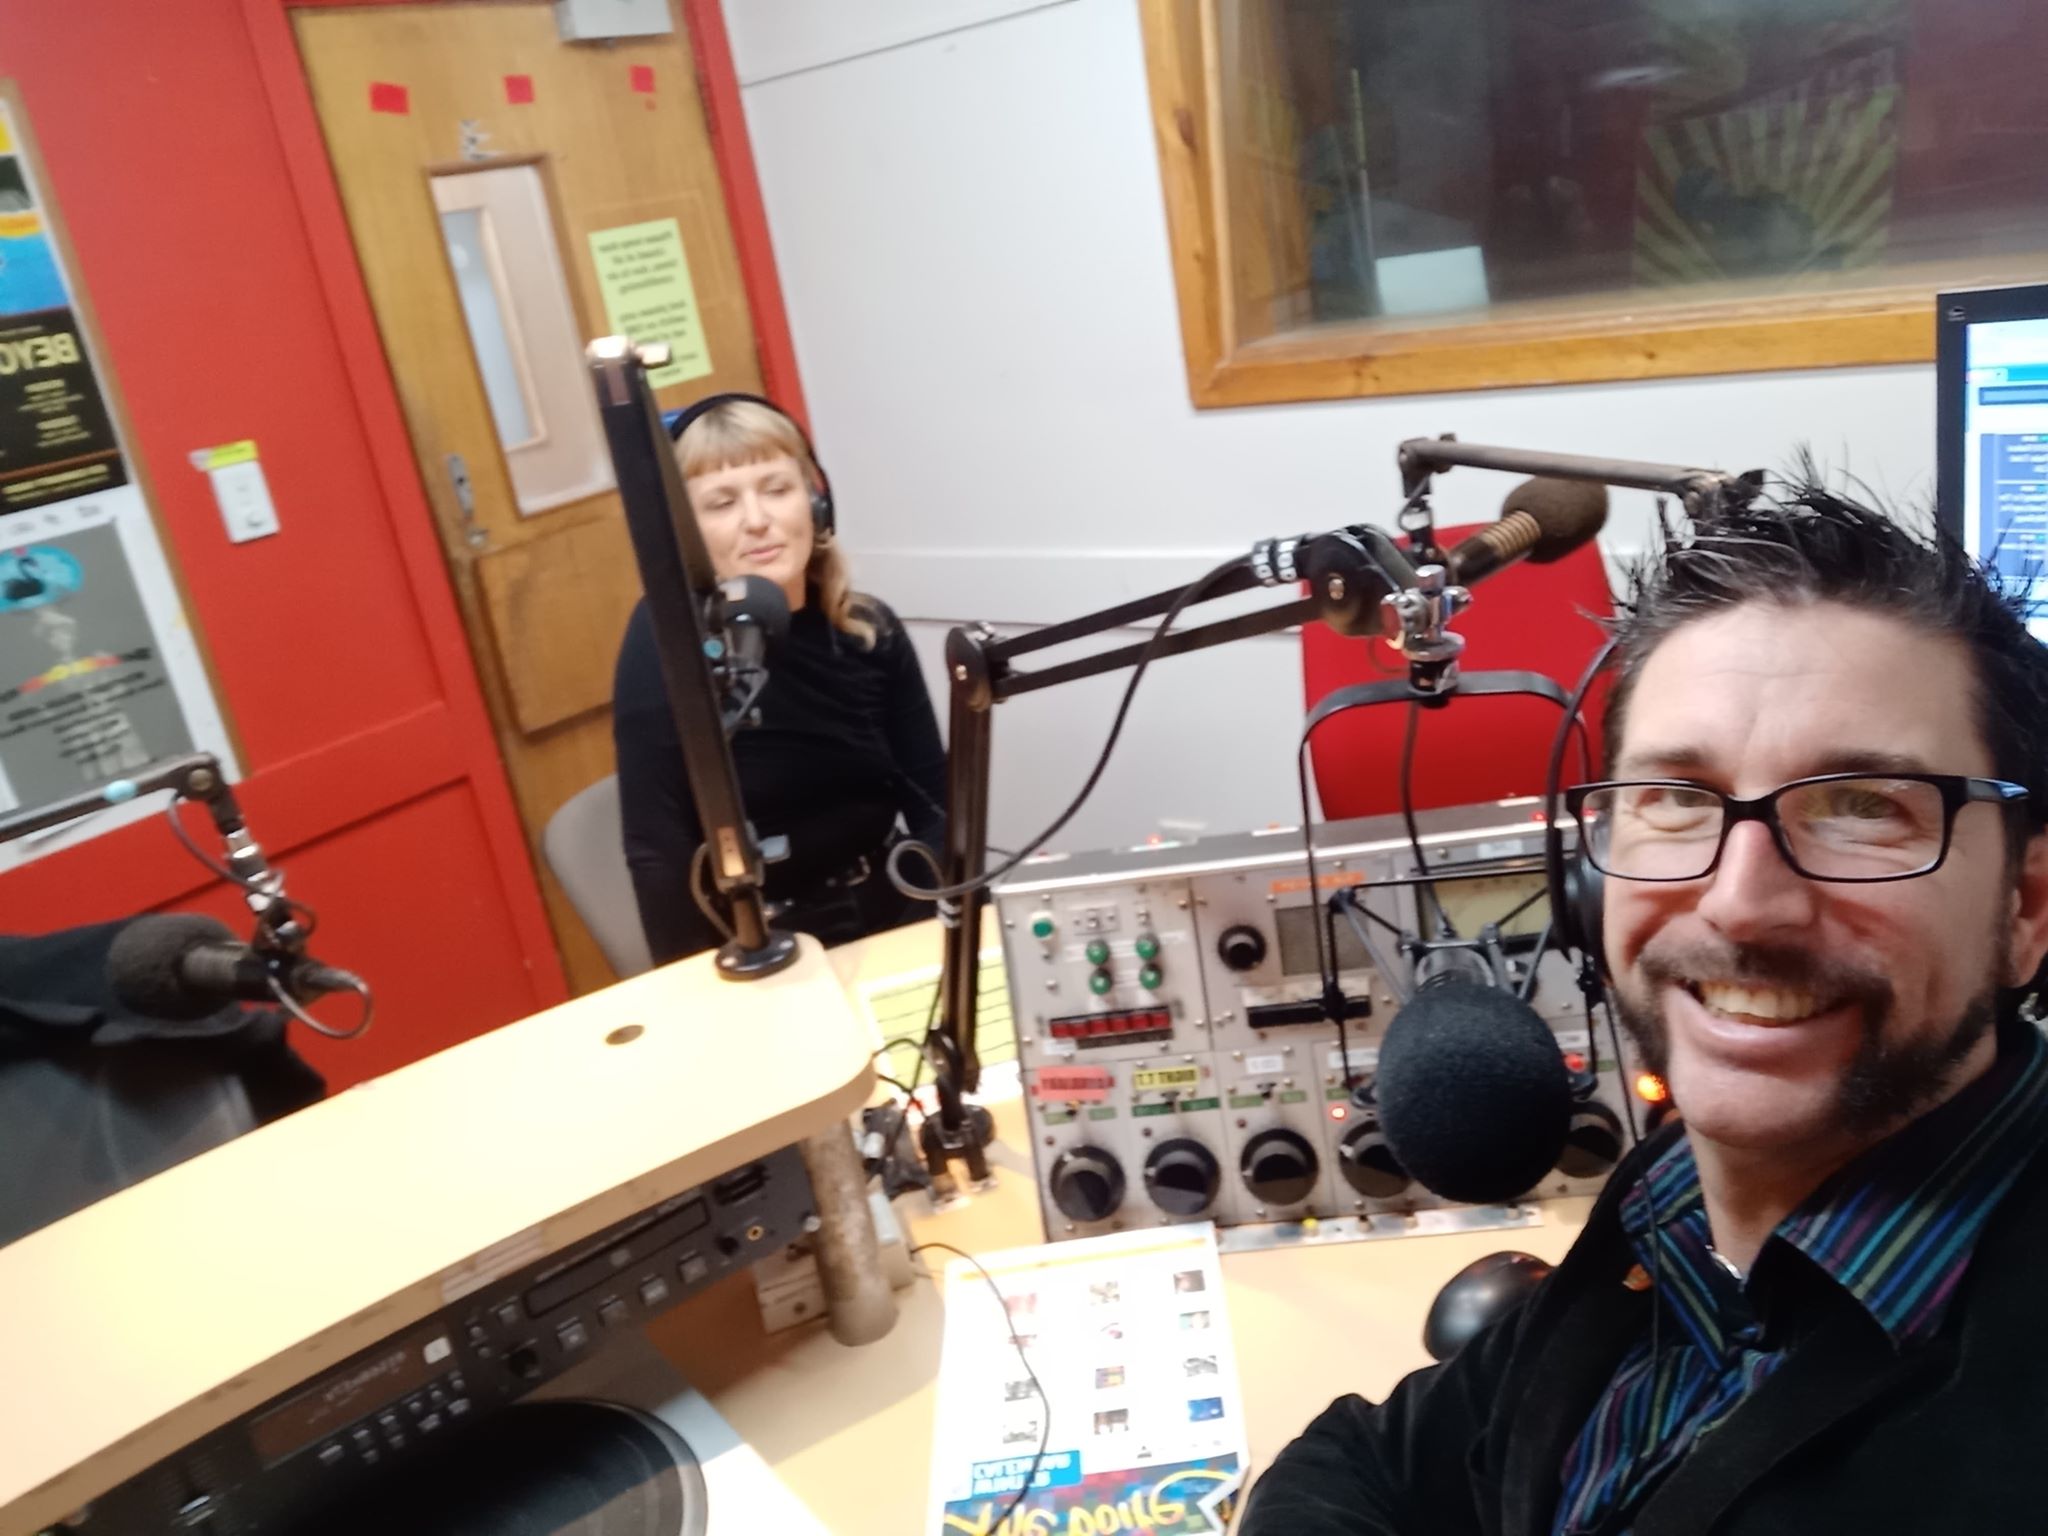 Phil and Claire in the 3CR studio